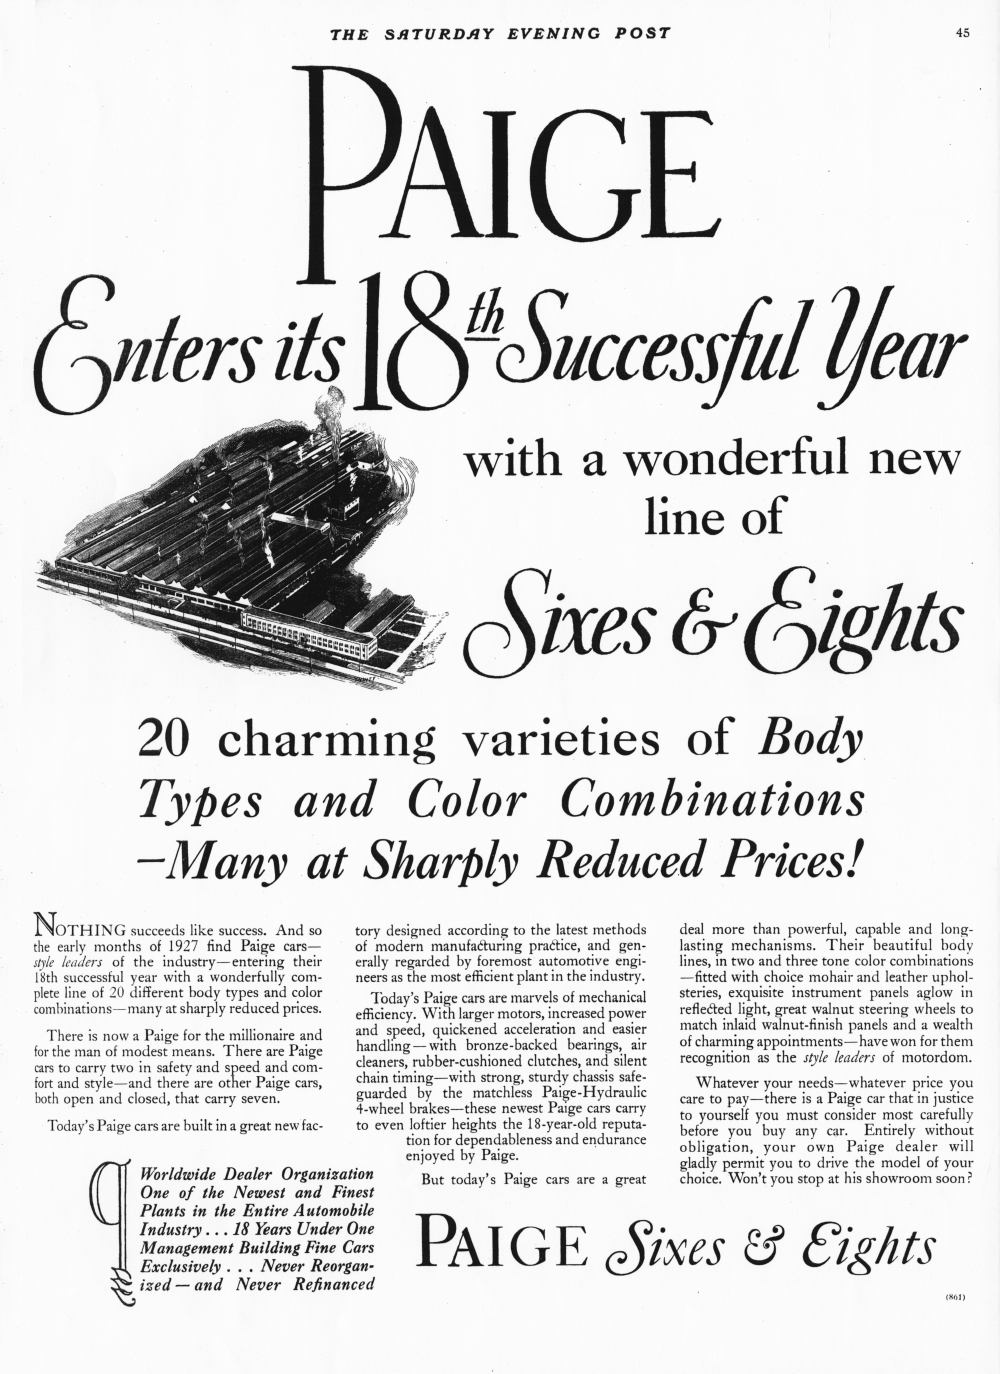 1927 Paige Sixes & Eights